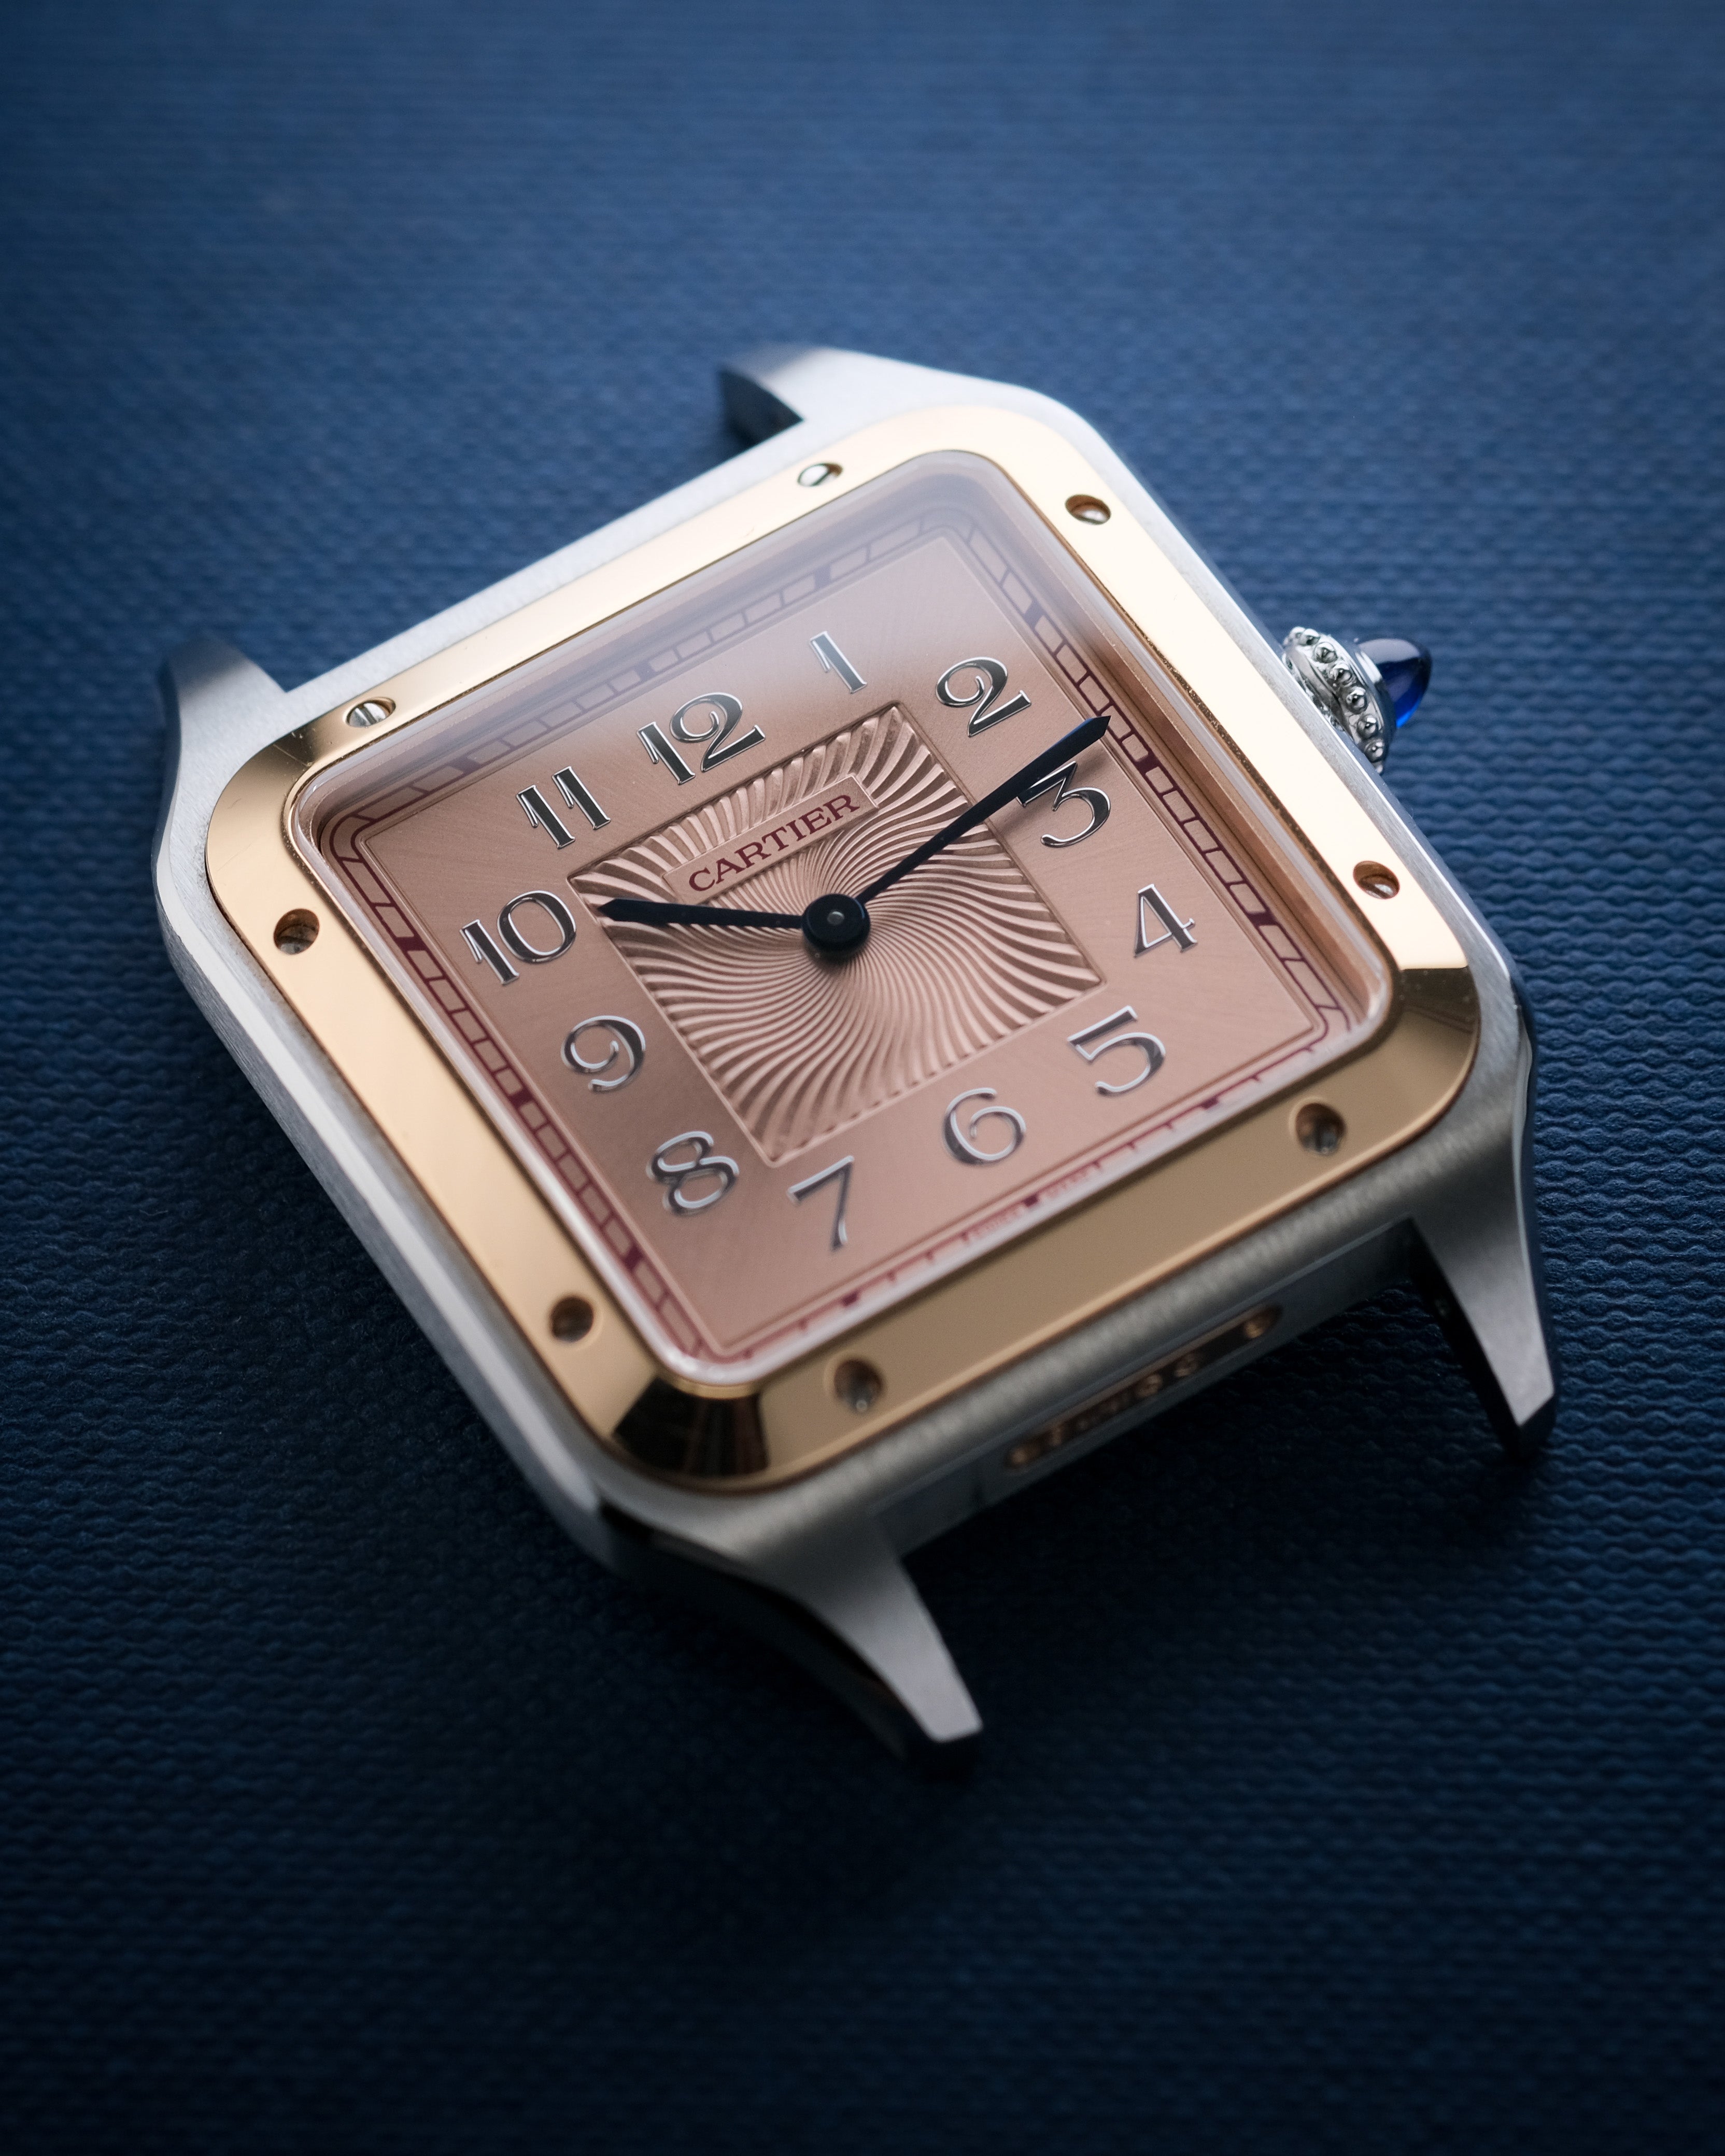 Cartier Santos Dumont Extra Large Limited Edition "No.19"